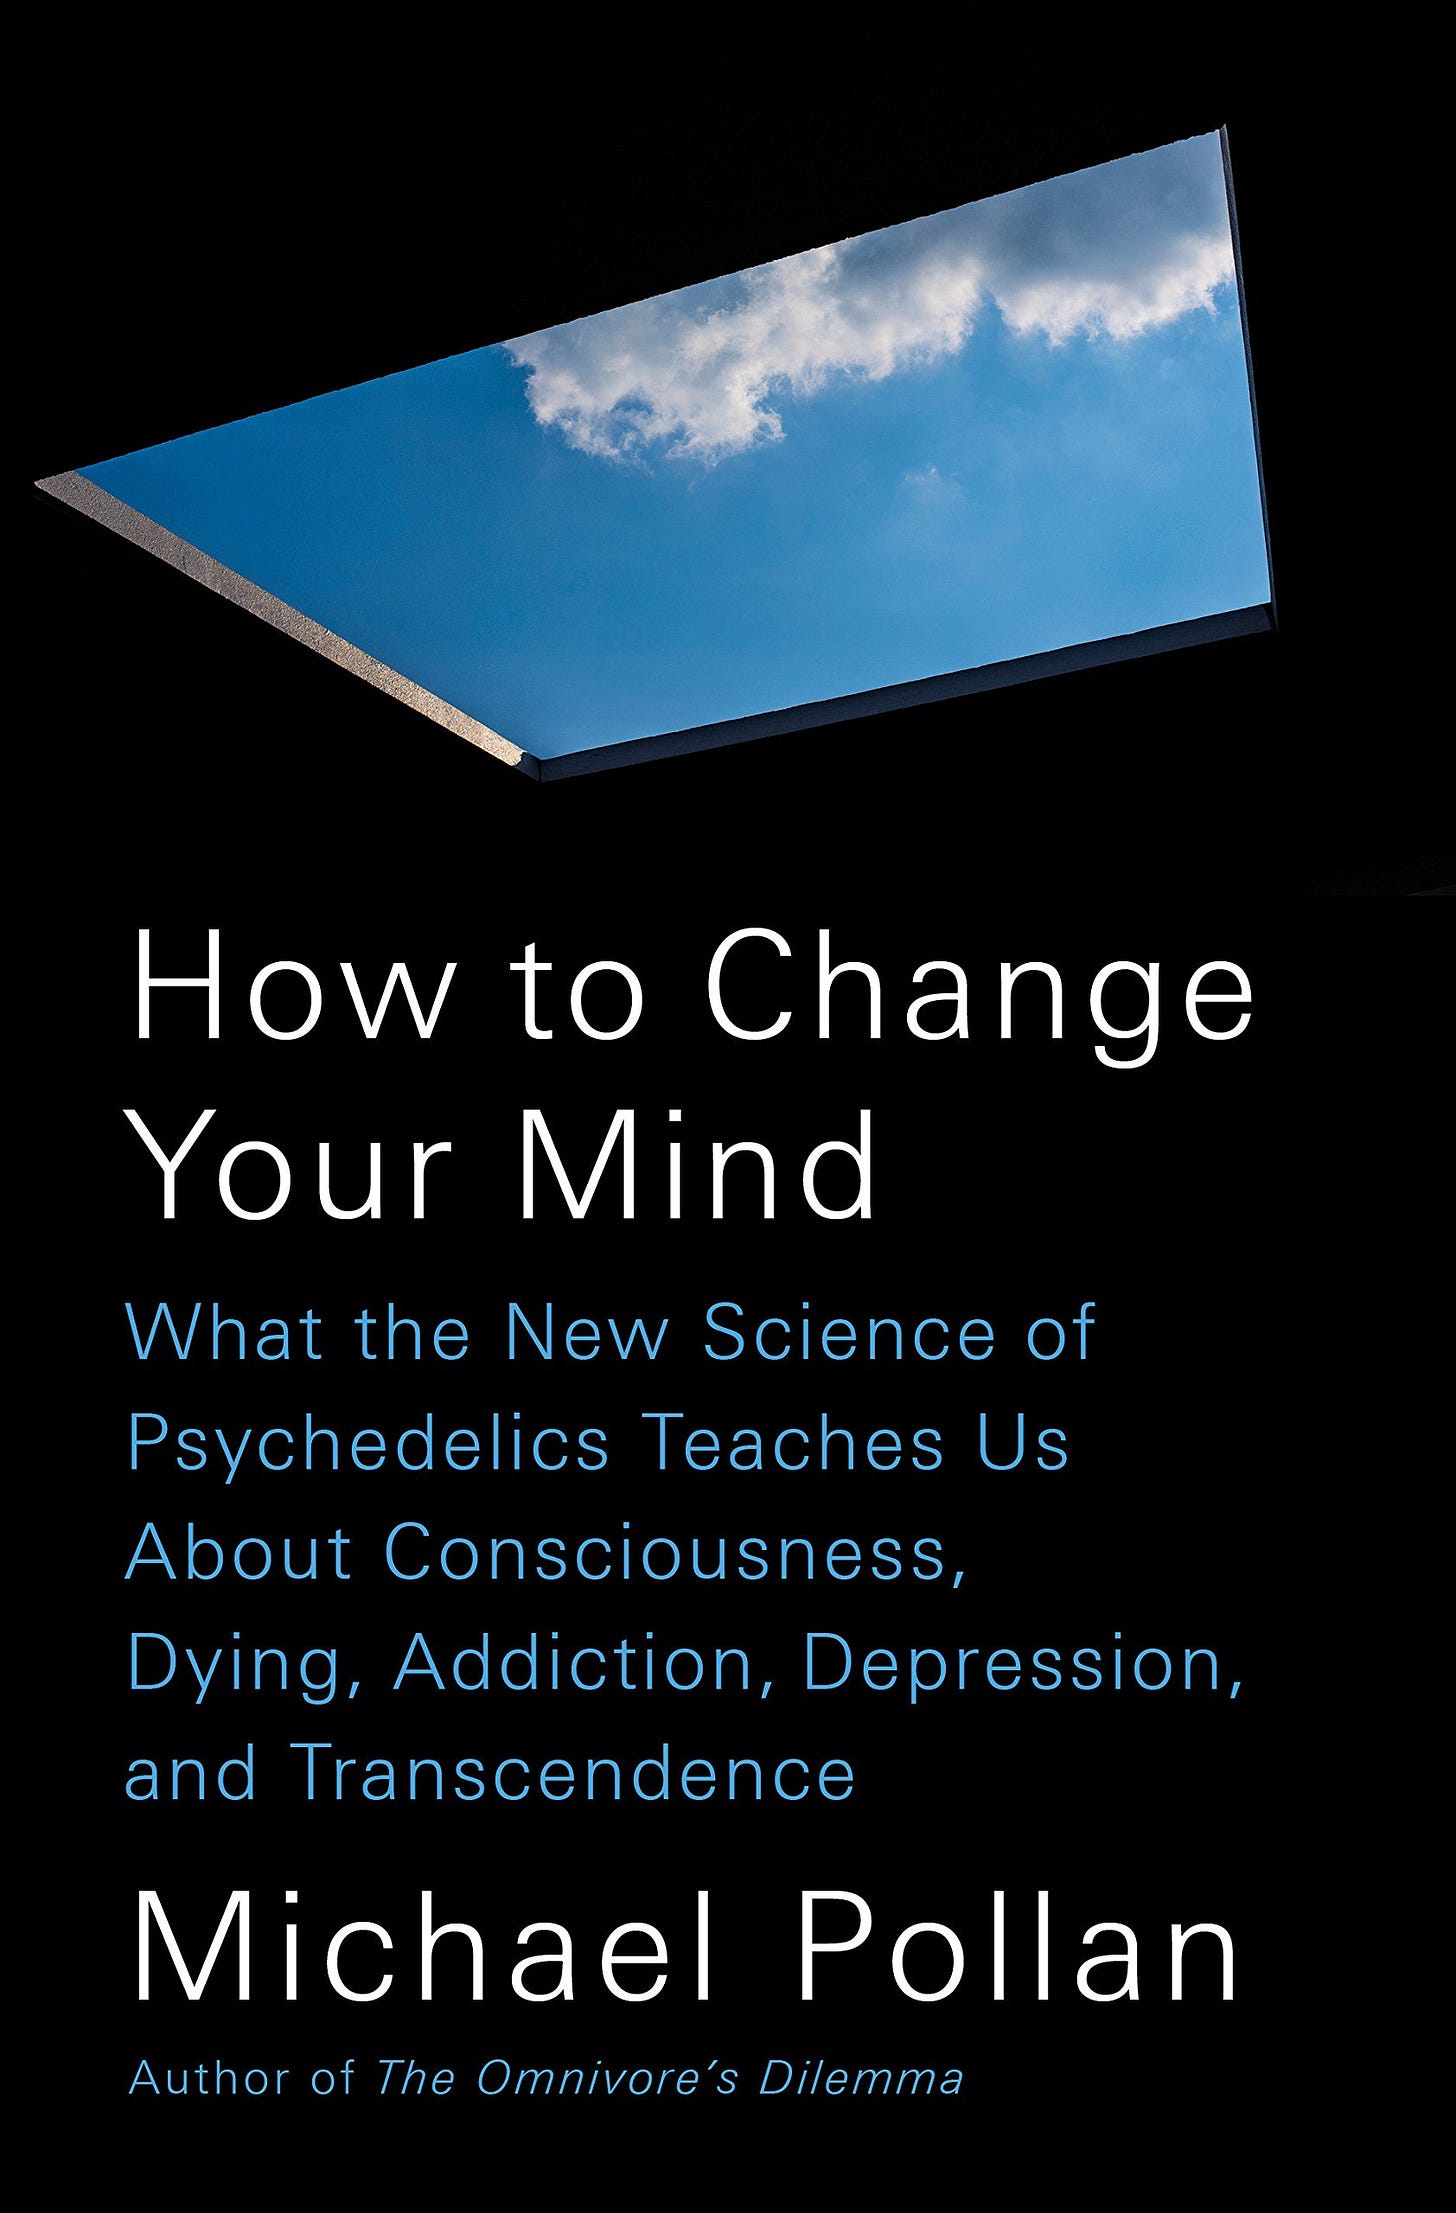 How to Change Your Mind: What the New Science of Psychedelics Teaches Us  About Consciousness, Dying, Addiction, Depression, and Transcendence:  Pollan, Michael: 9781594204227: Amazon.com: Books